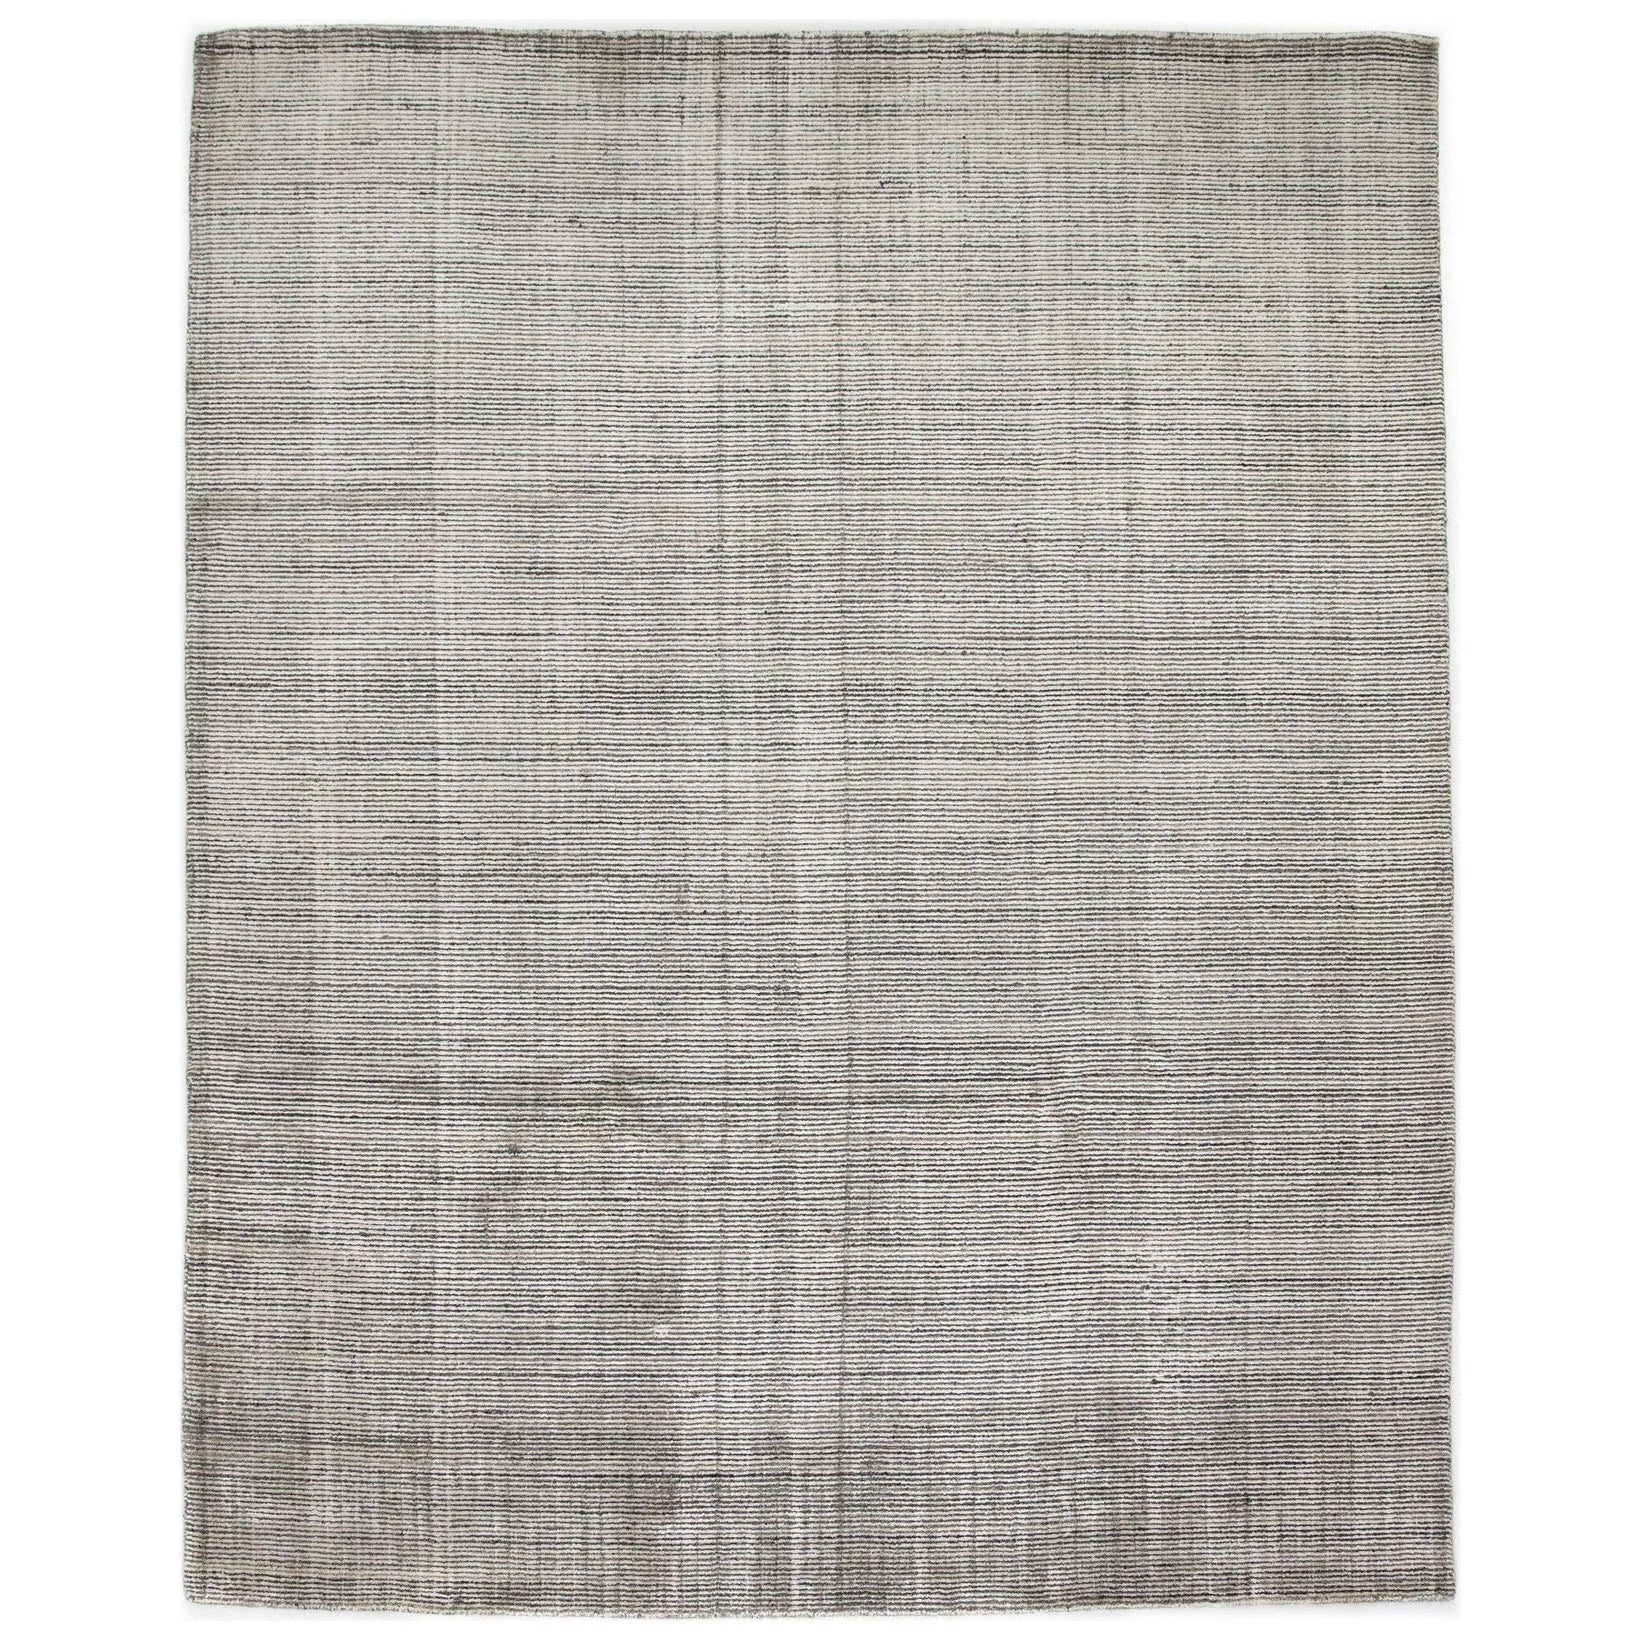 With a loop and short pile of alternating wool and viscose, neutral grey and beige hues contrast for a versatile look and tactile texture.Overall Dimensions144.00"w x 0.50"d x 180.00"hFull Details &amp; SpecificationsTear SheetCleaning Code : X (vacuum Or Light Brush, No Cleaning Products Amethyst Home provides interior design, new home construction design consulting, vintage area rugs, and lighting in the Seattle metro area.